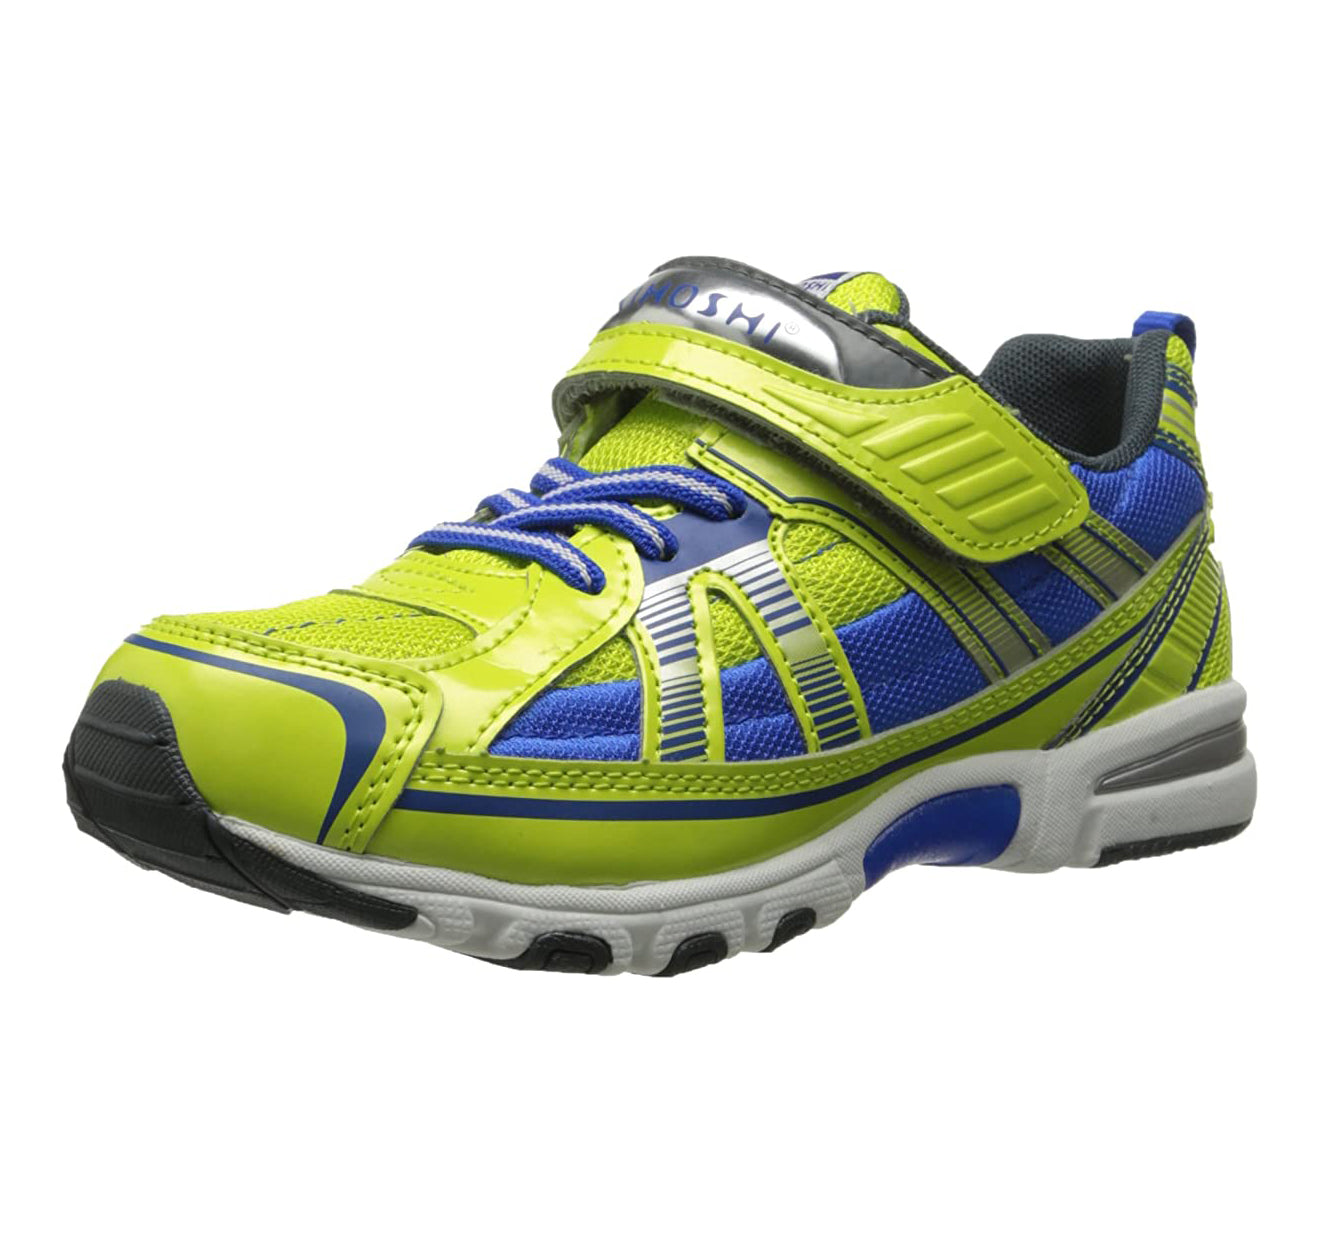 Child Tsukihoshi Storm Sneaker in Lime/Blue from the front view